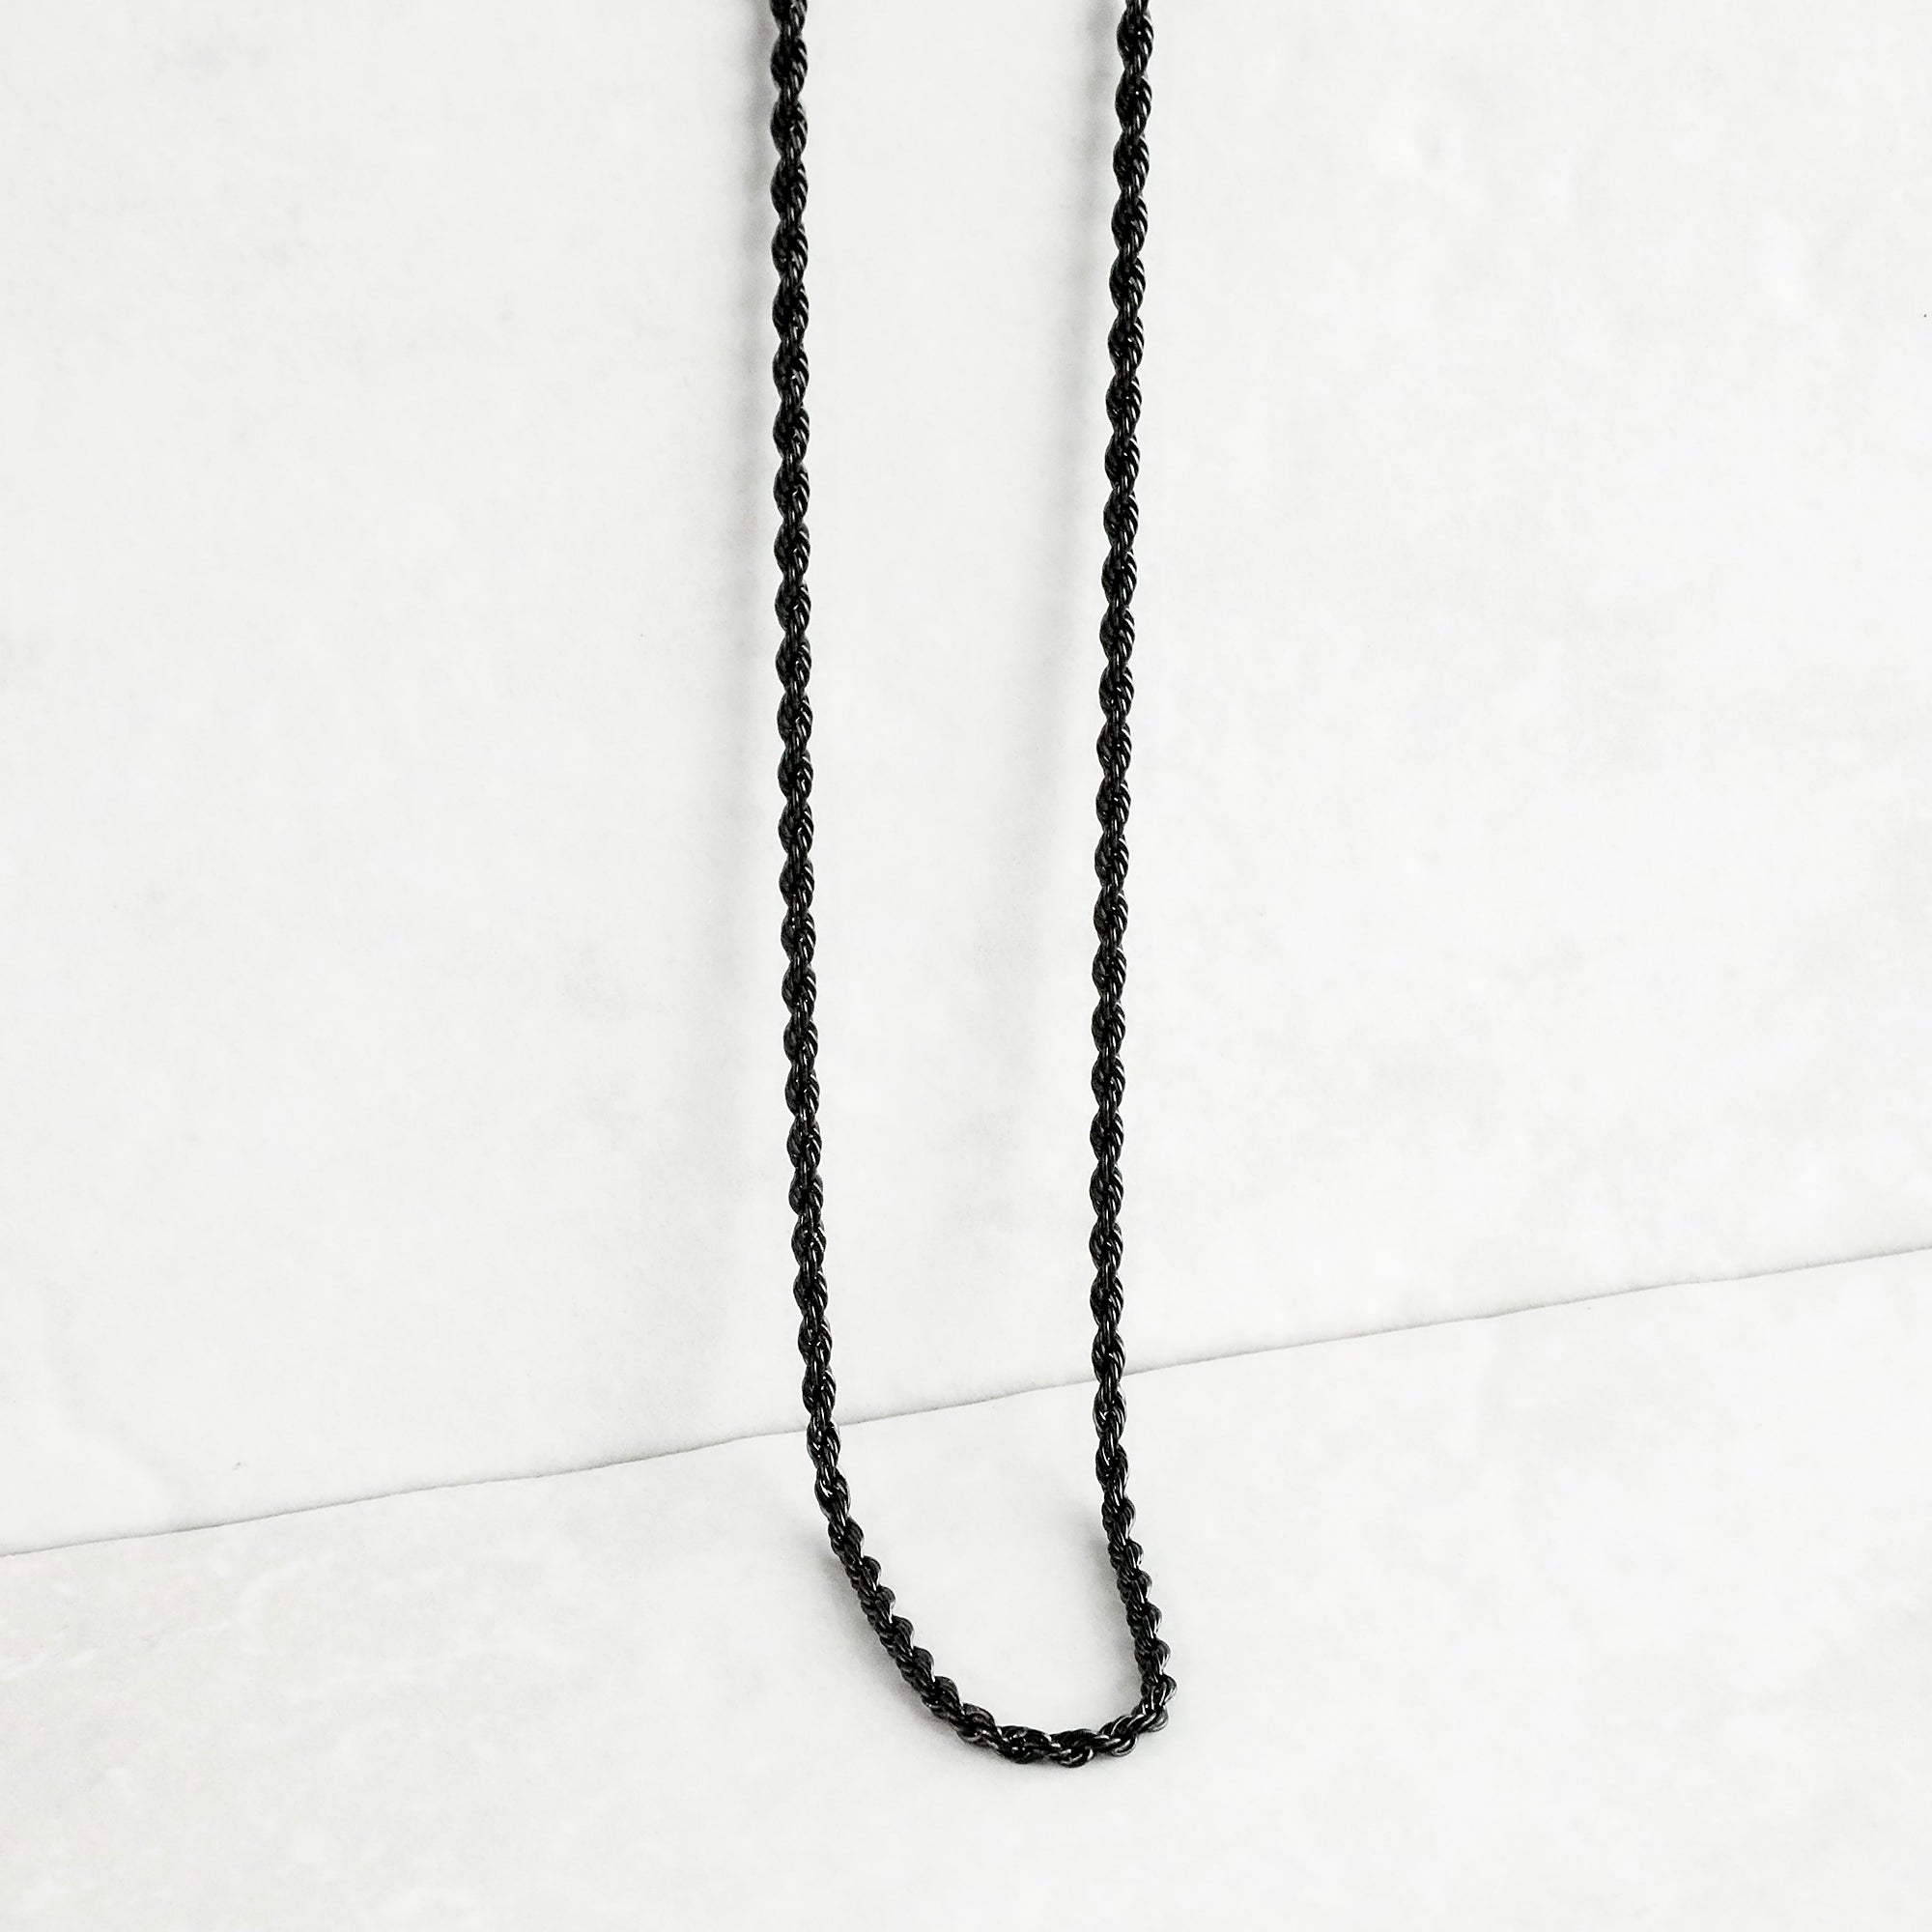 Rope Chain Necklace - Black 2.5mm